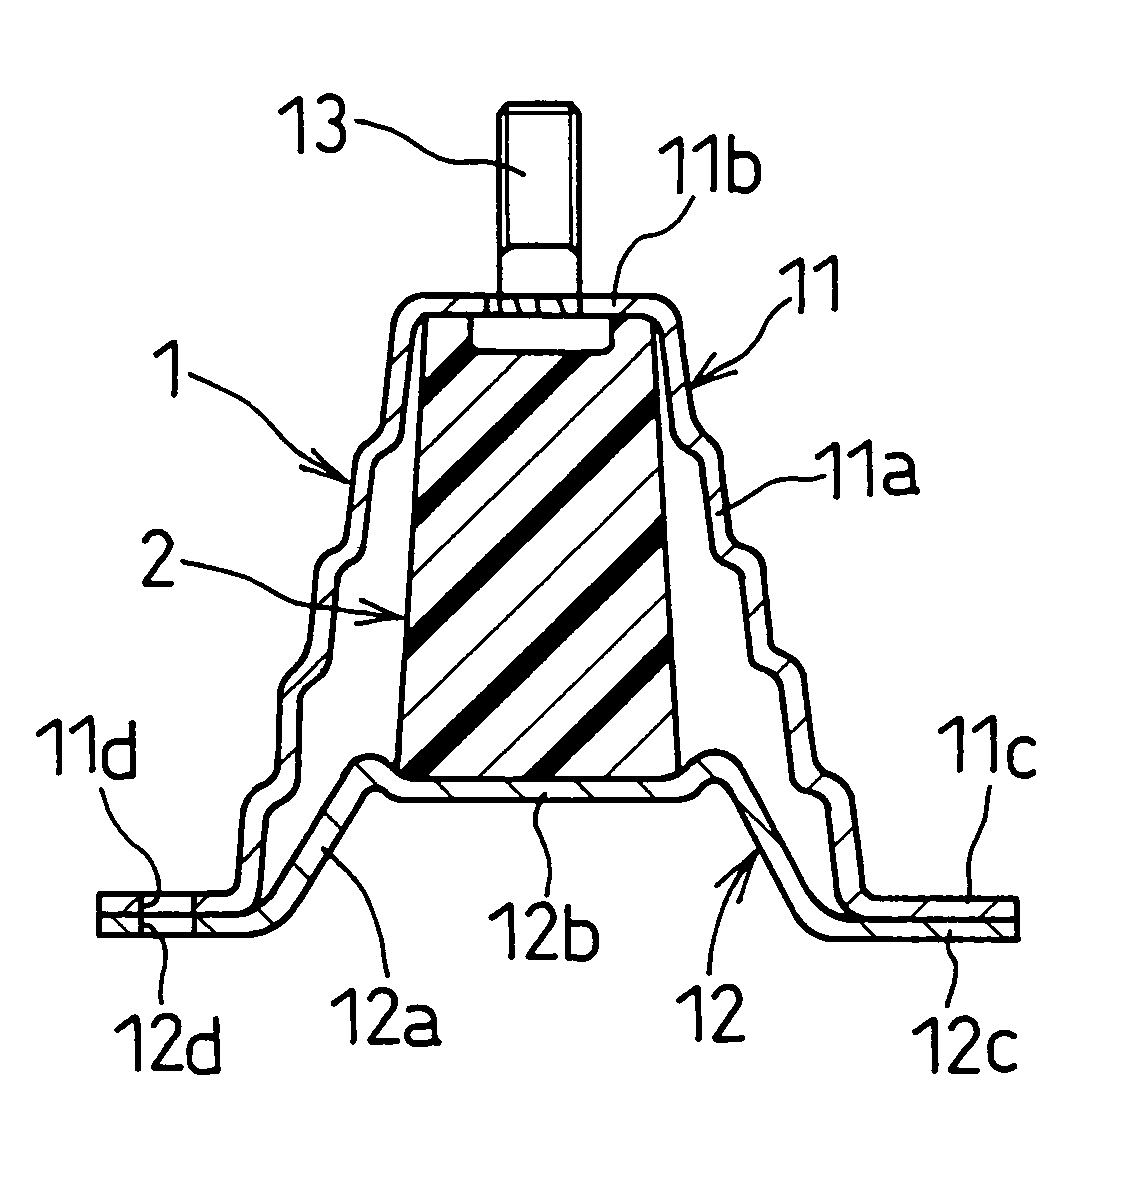 Shock absorber for vehicles